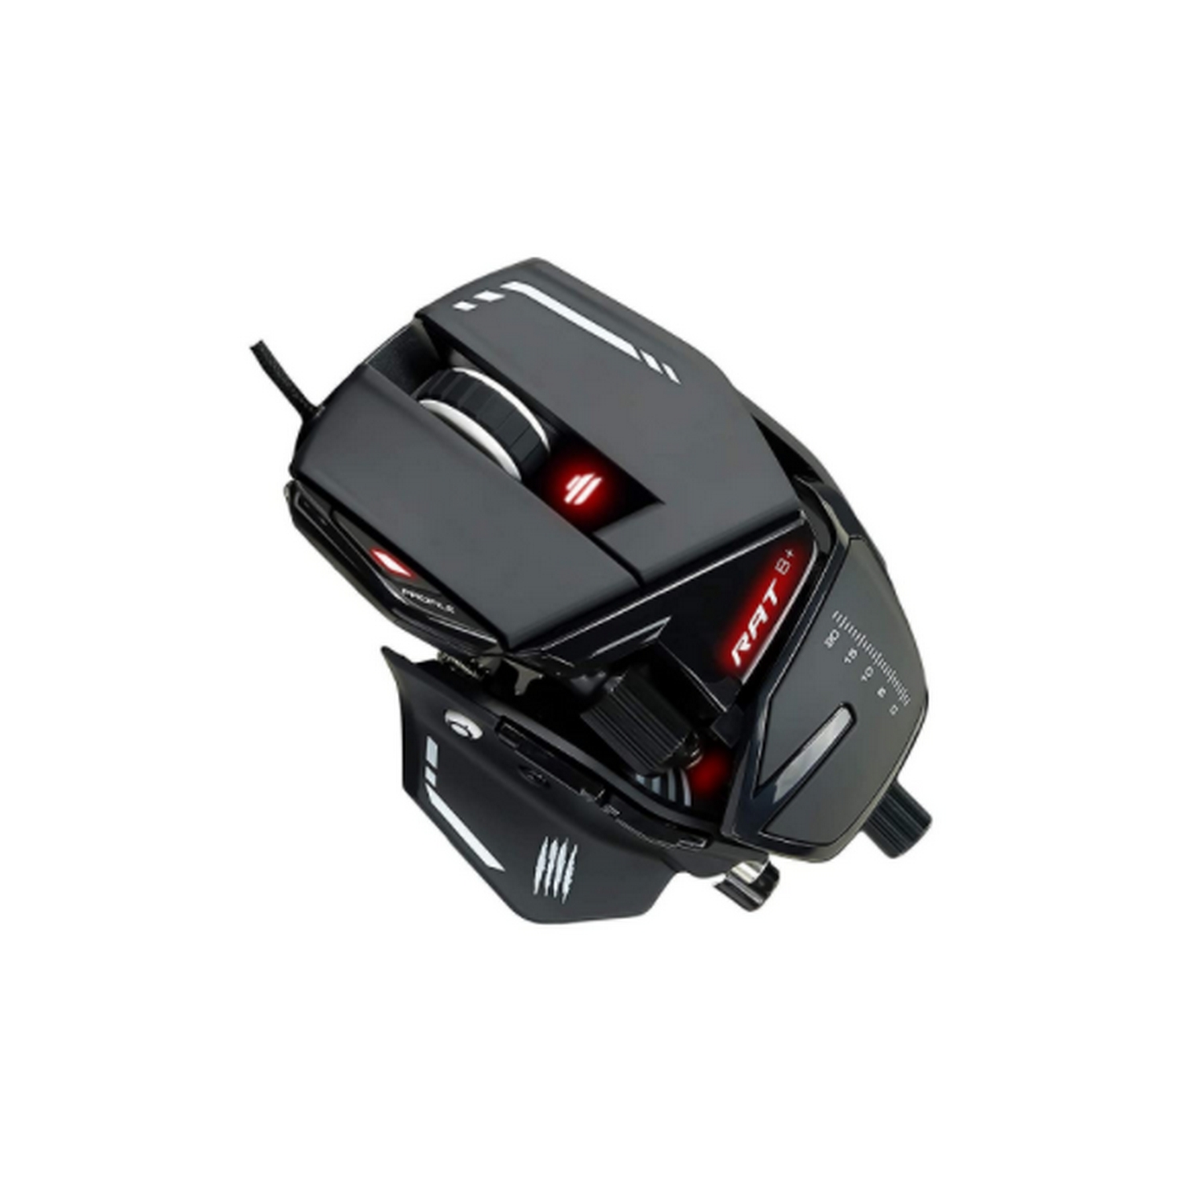 MAD CATZ 8+ OPTICAL MOUSE, Maus, GAMING R.A.T. Schwarz Gaming MR05DCINBL000-0 BL